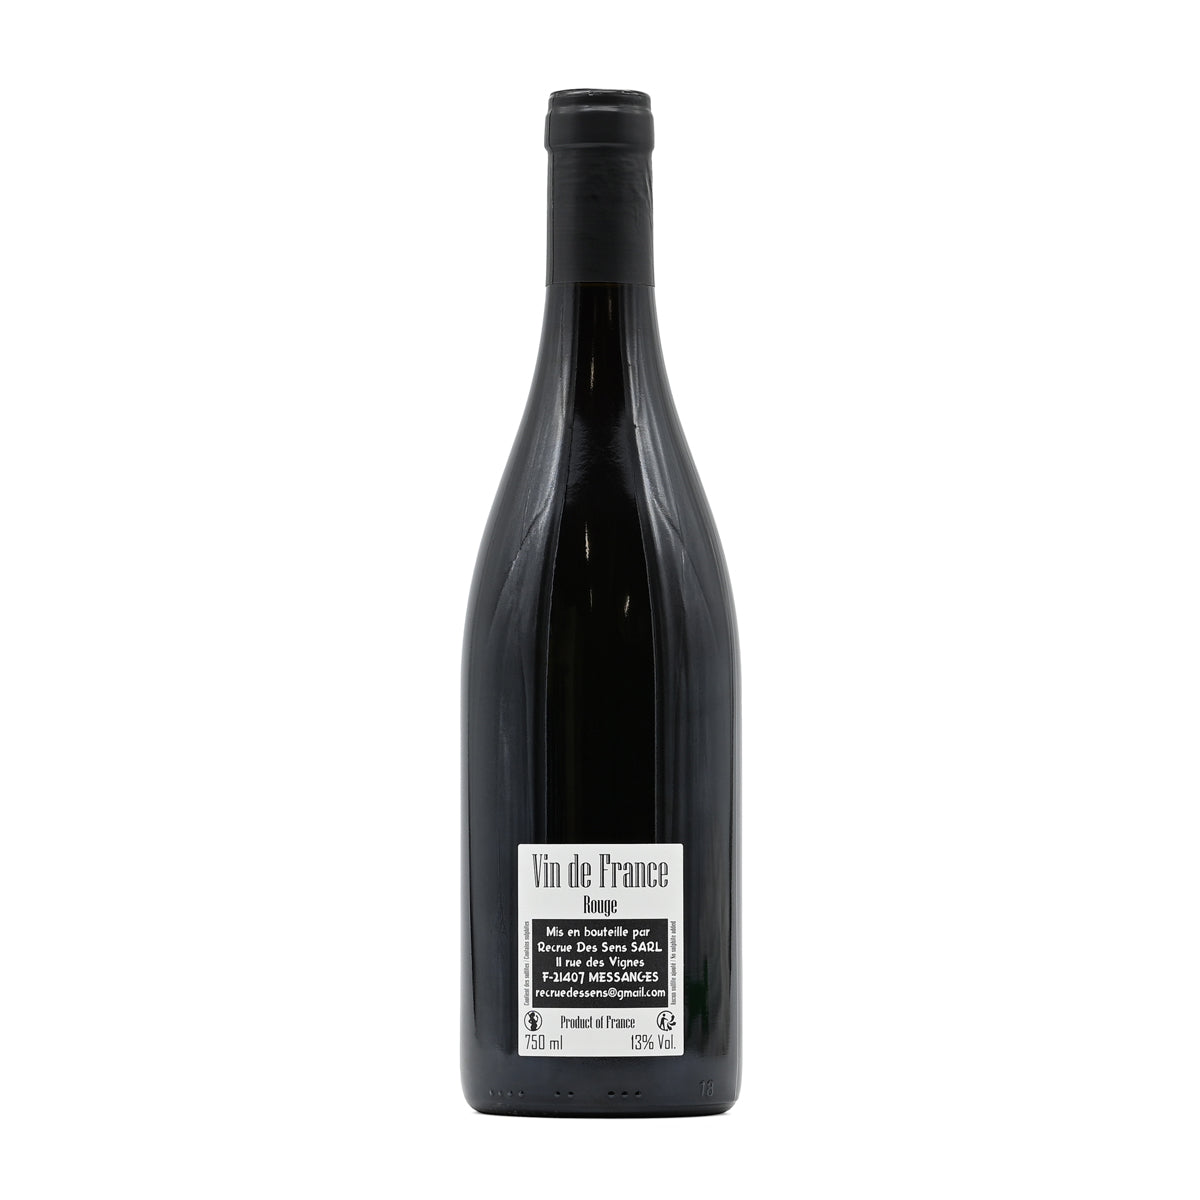 Yann Durieux VDF PV Rouge 2019, 750ml French red wine, made from Pinot Noir; Vin de France, from Recrue Des Sens, Burgundy, France – GDV Fine Wines, Hong Kong